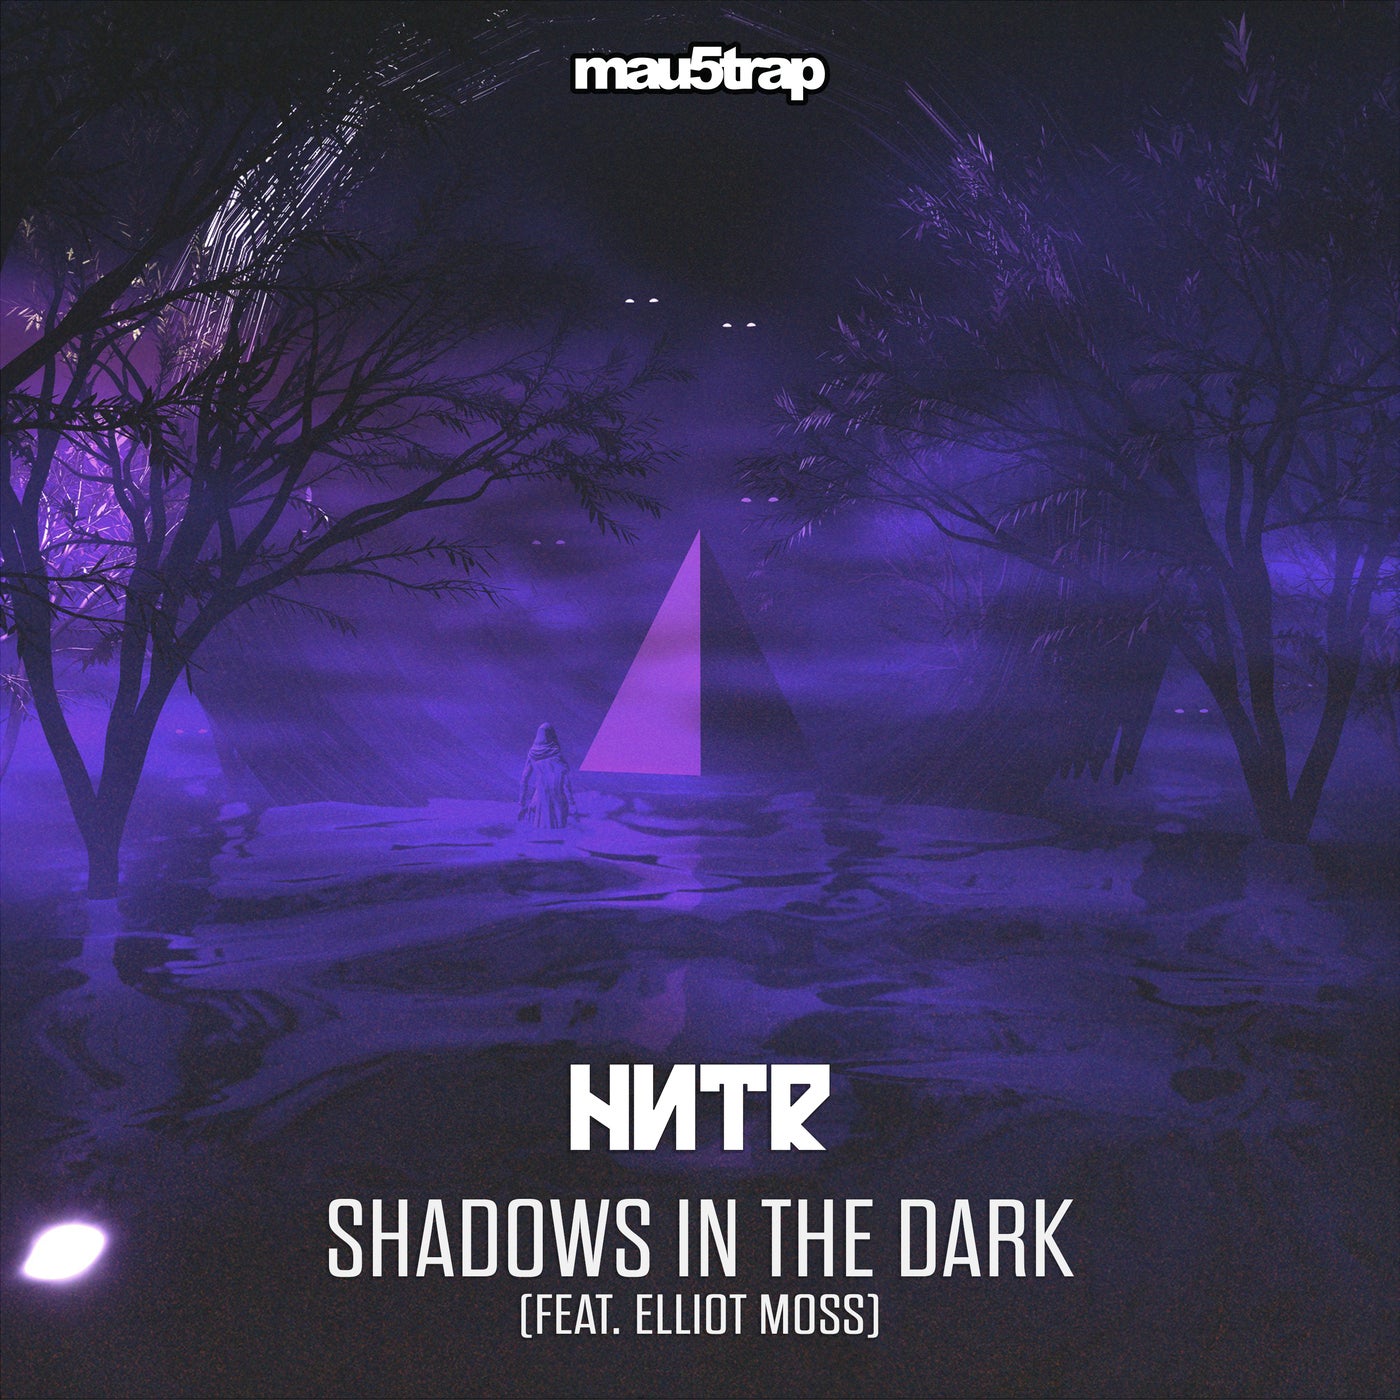 HNTR - SHADOWS IN THE DARK (EXTENDED MIX) FEAT. ELLIOT MOSS [MAU50350B]